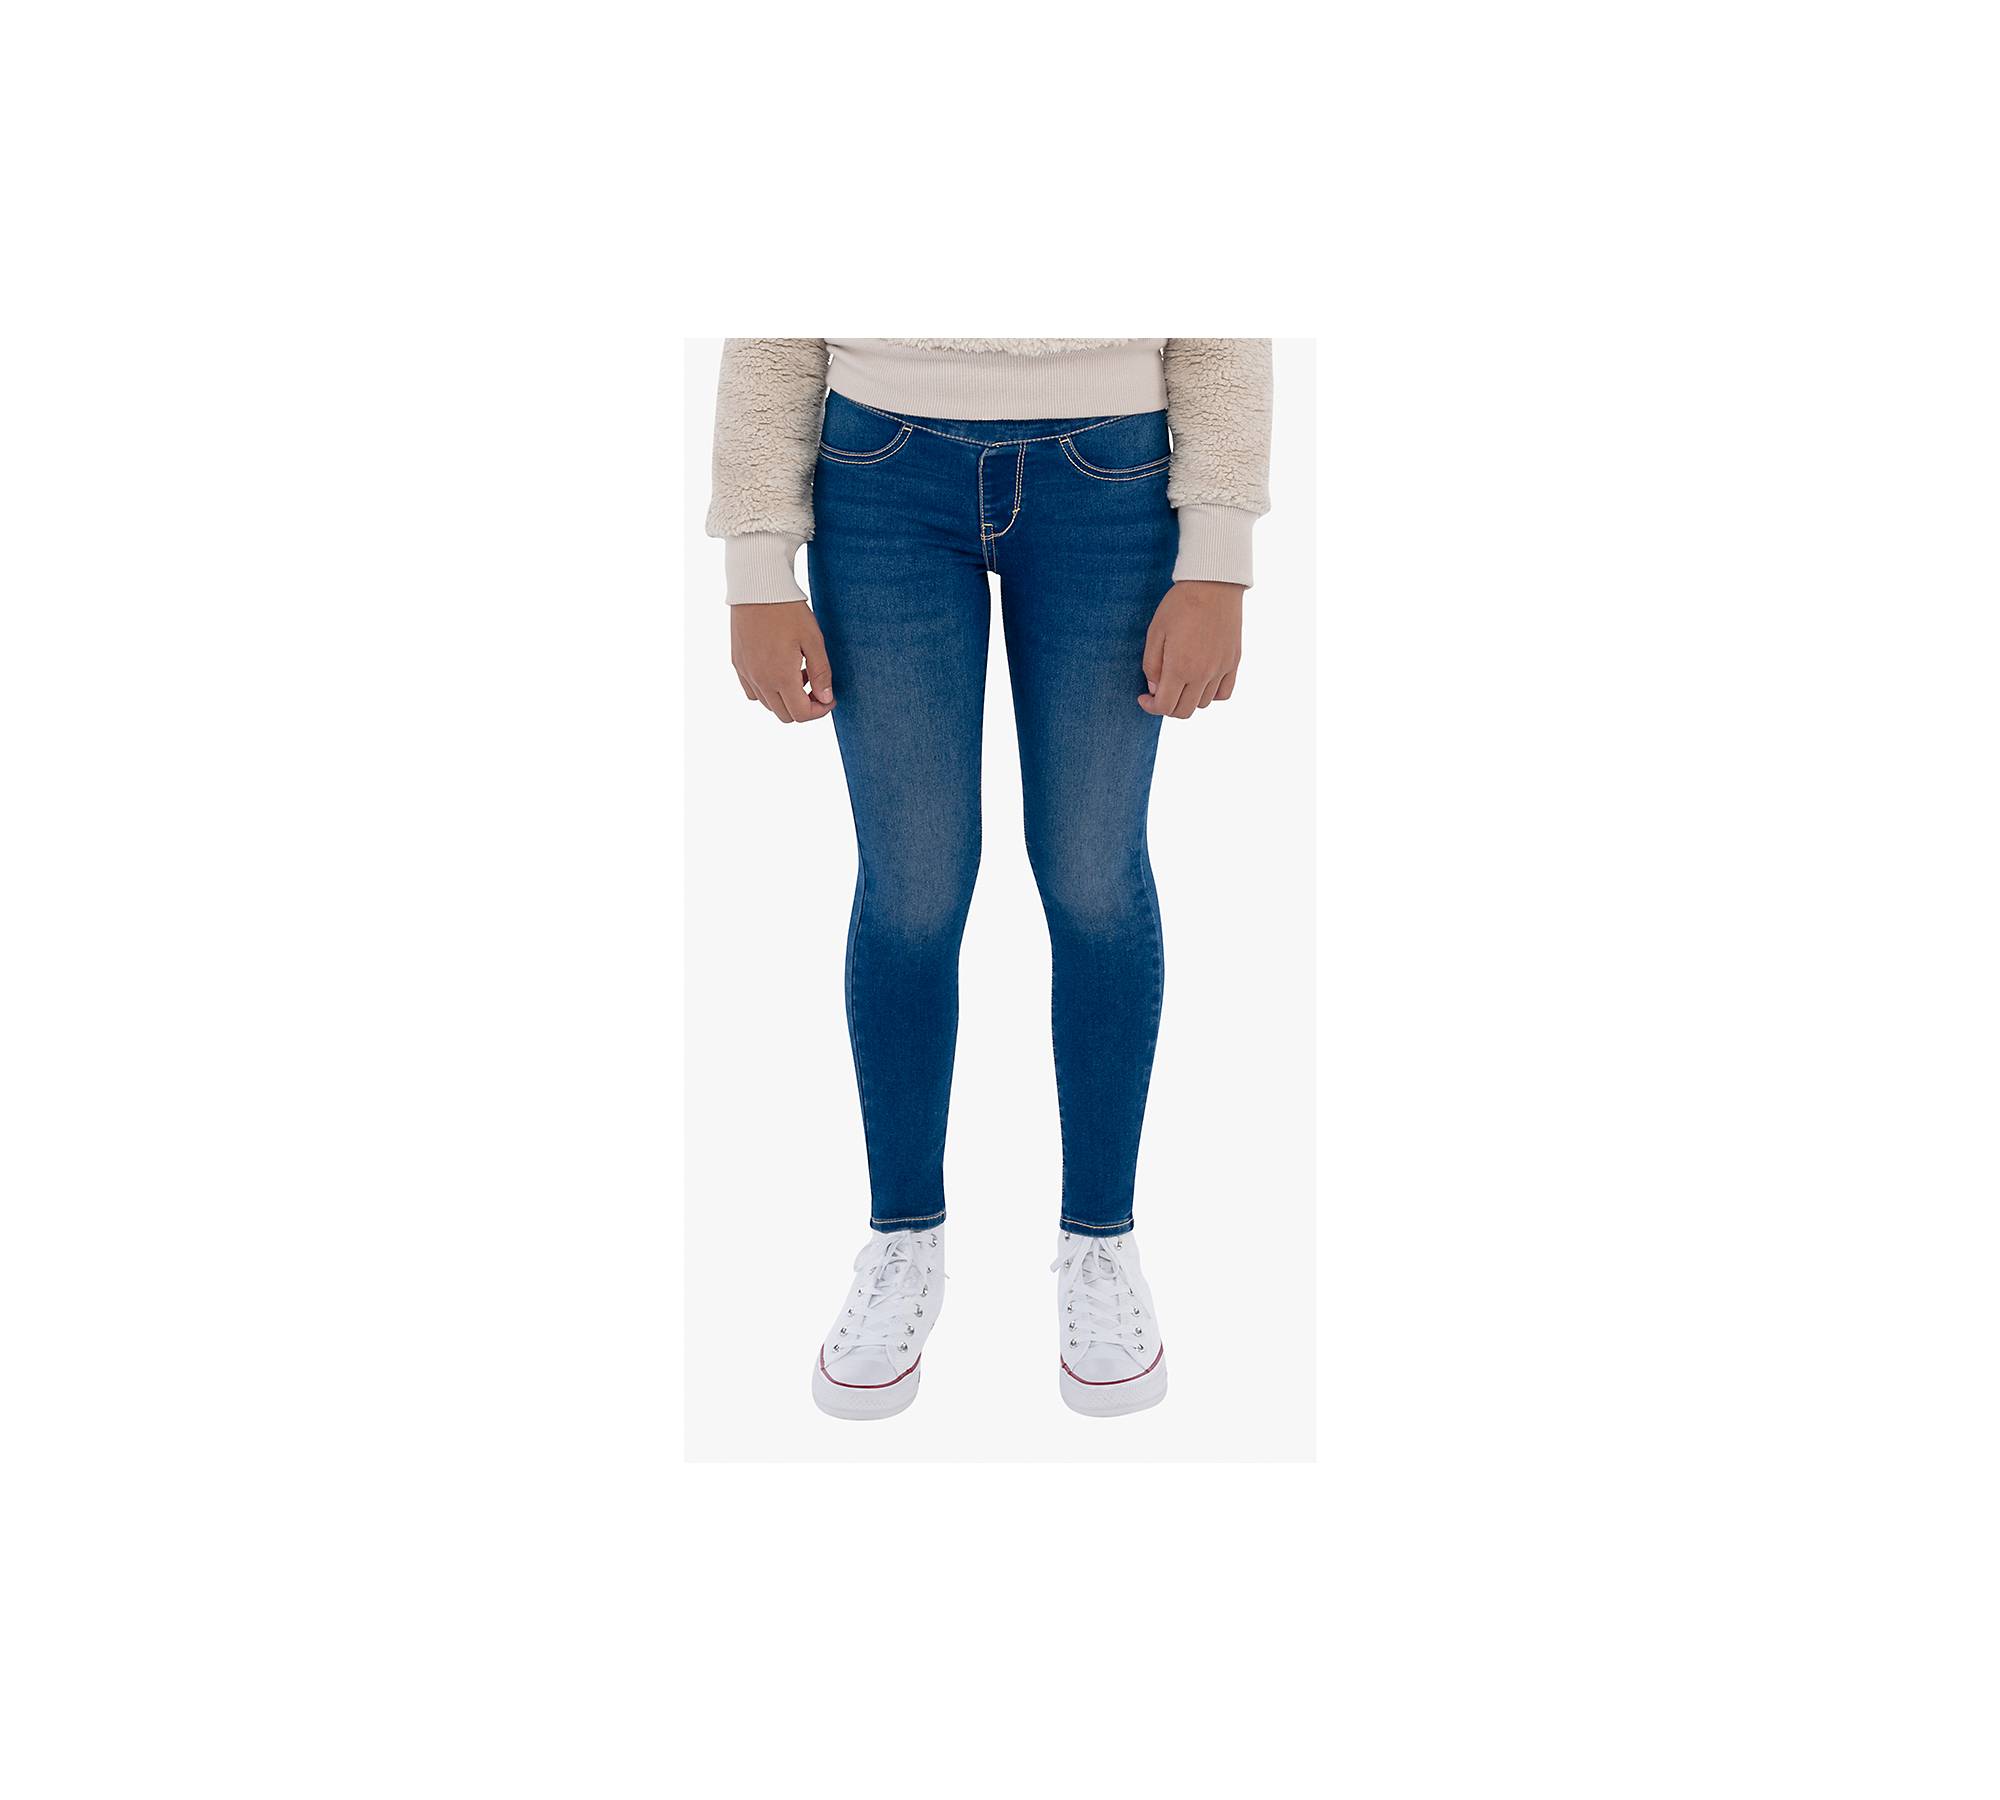 Leggings and Jeggings for Girls, Explore our New Arrivals